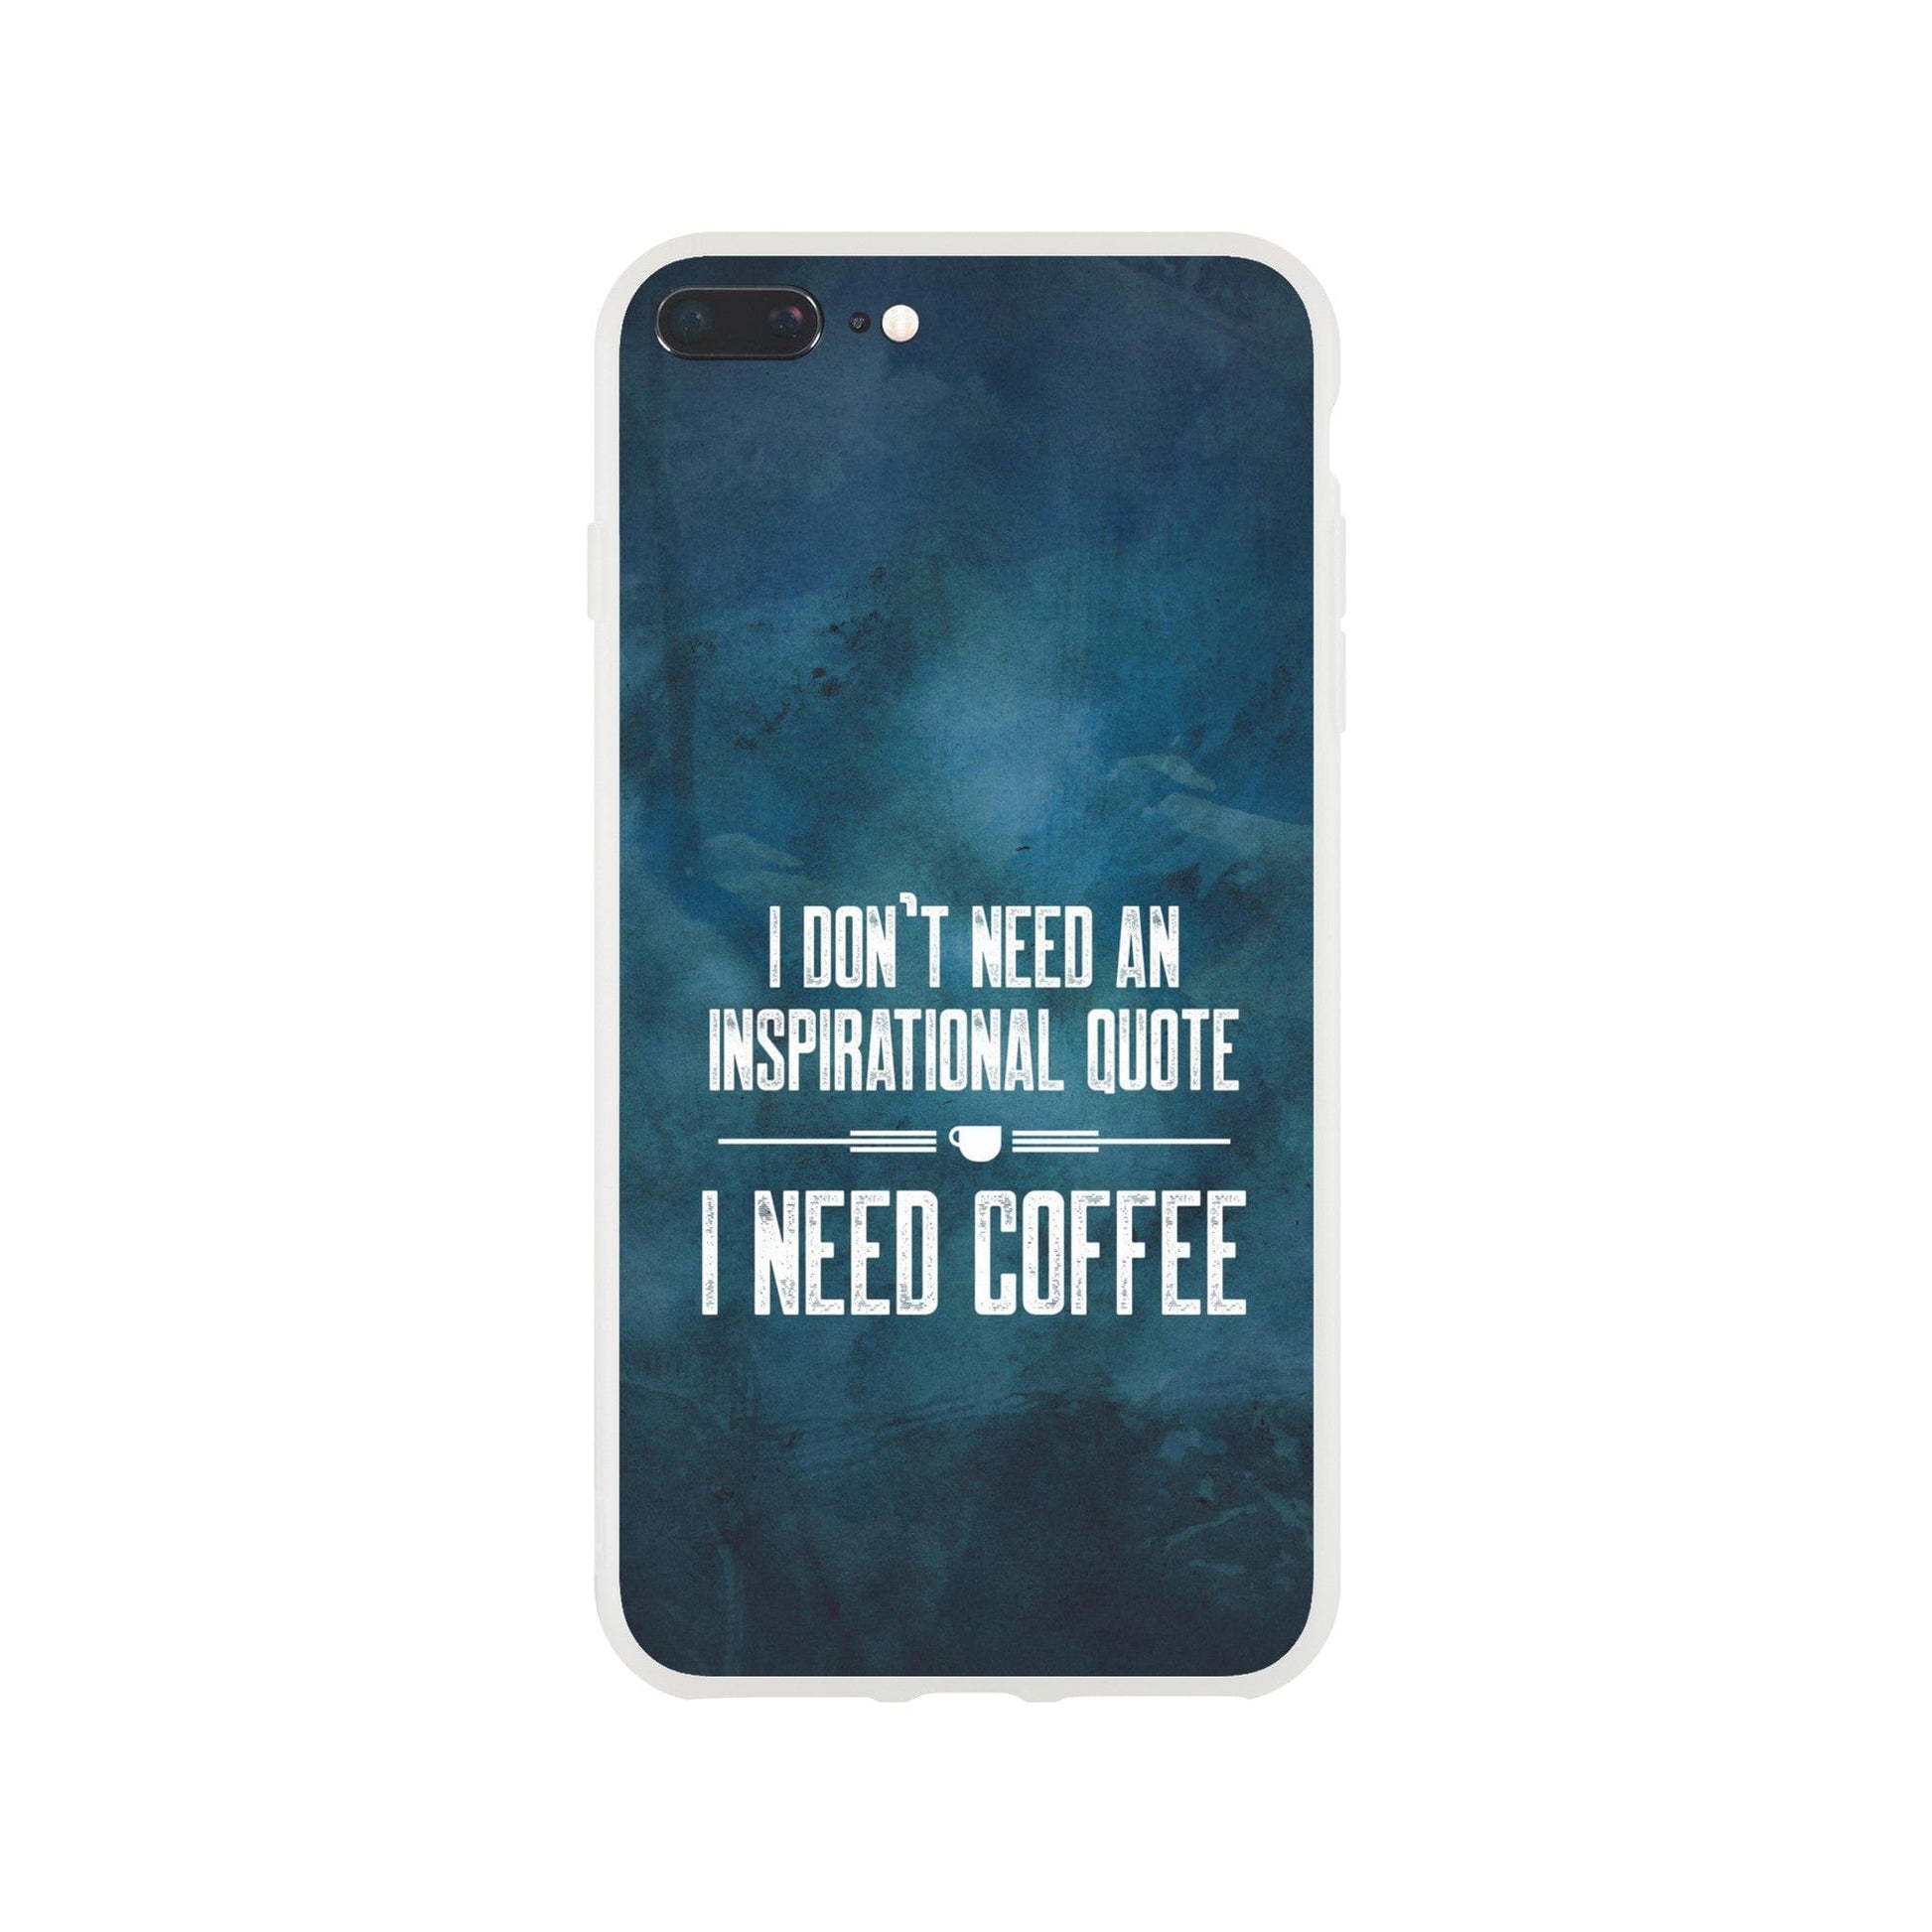 Good Bean Gifts "Coffee not Quotes" Flexi Cell Phone Case iPhone 8 Plus